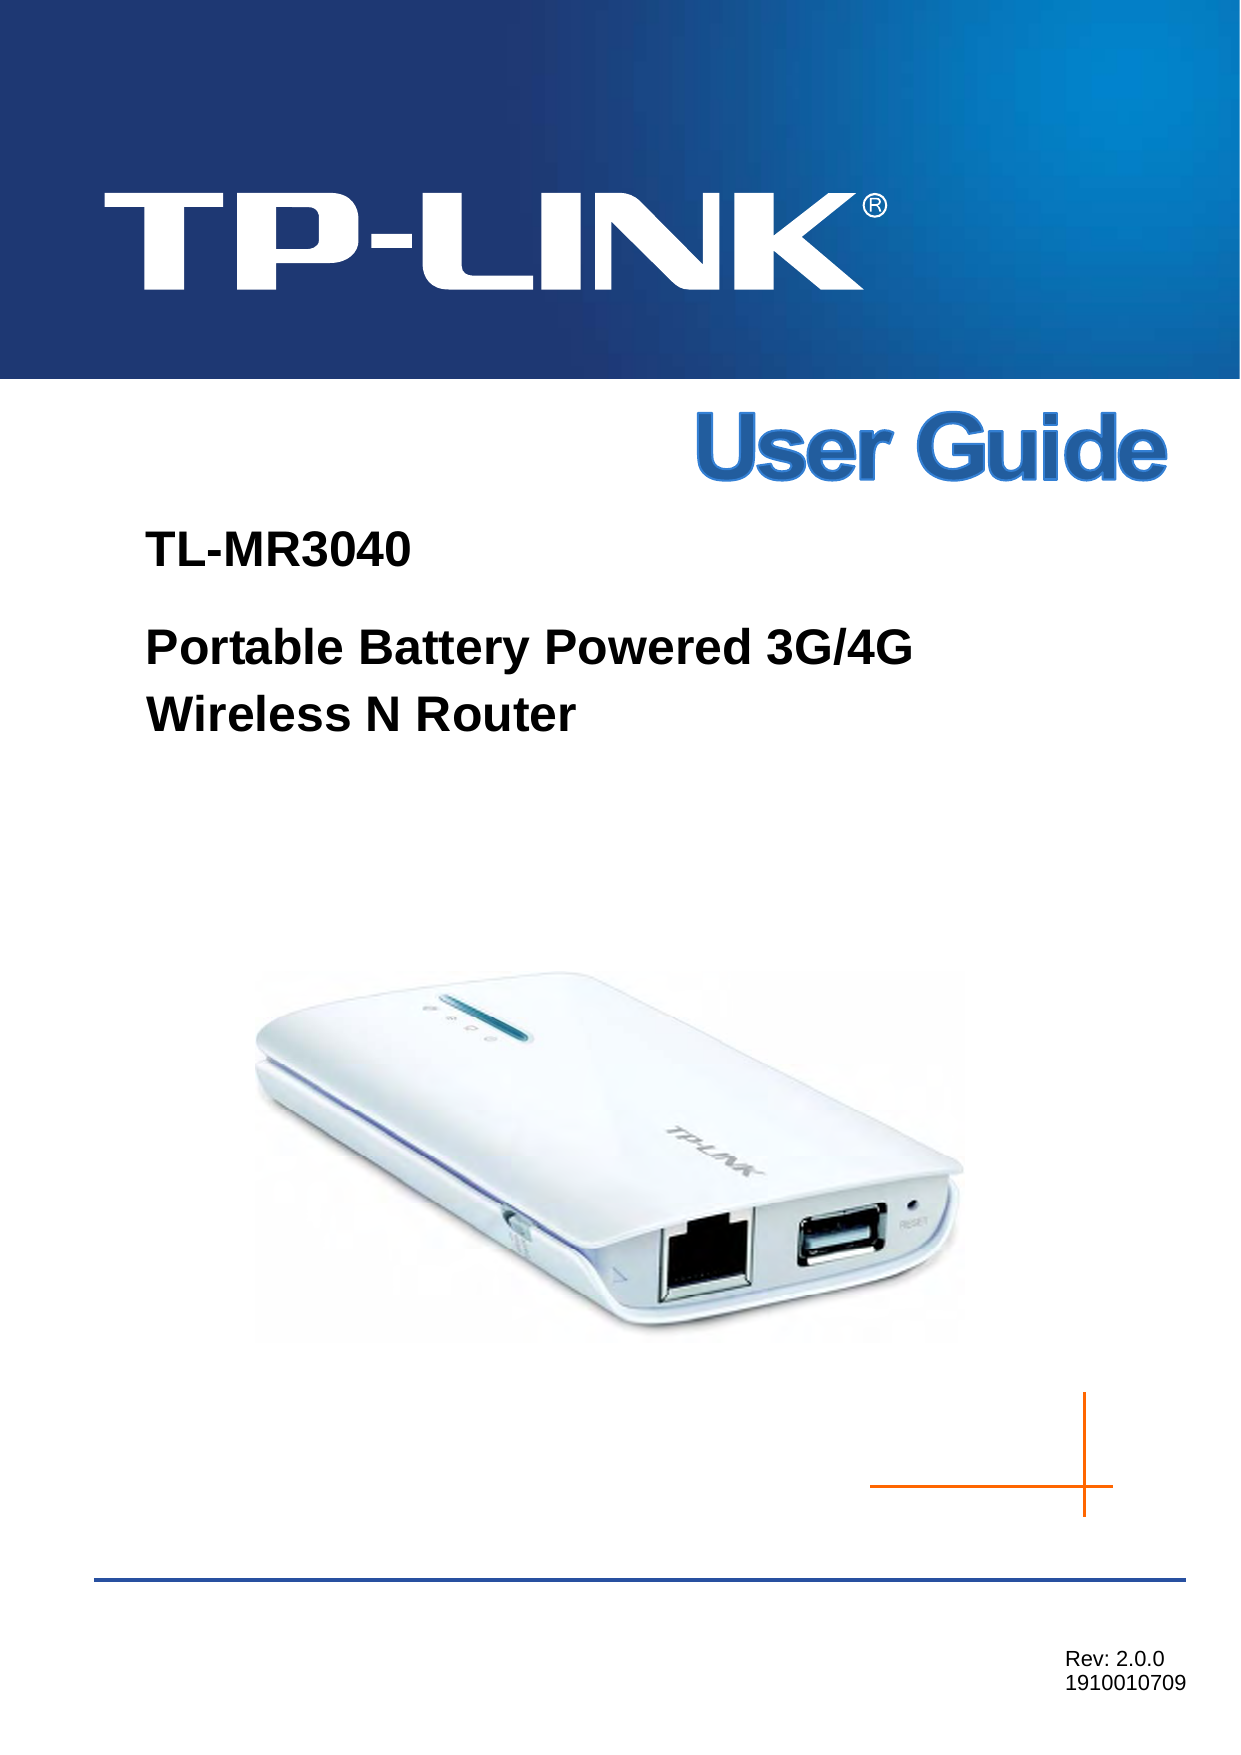     TL-MR3040 Portable Battery Powered 3G/4G Wireless N Router      Rev: 2.0.0 1910010709 